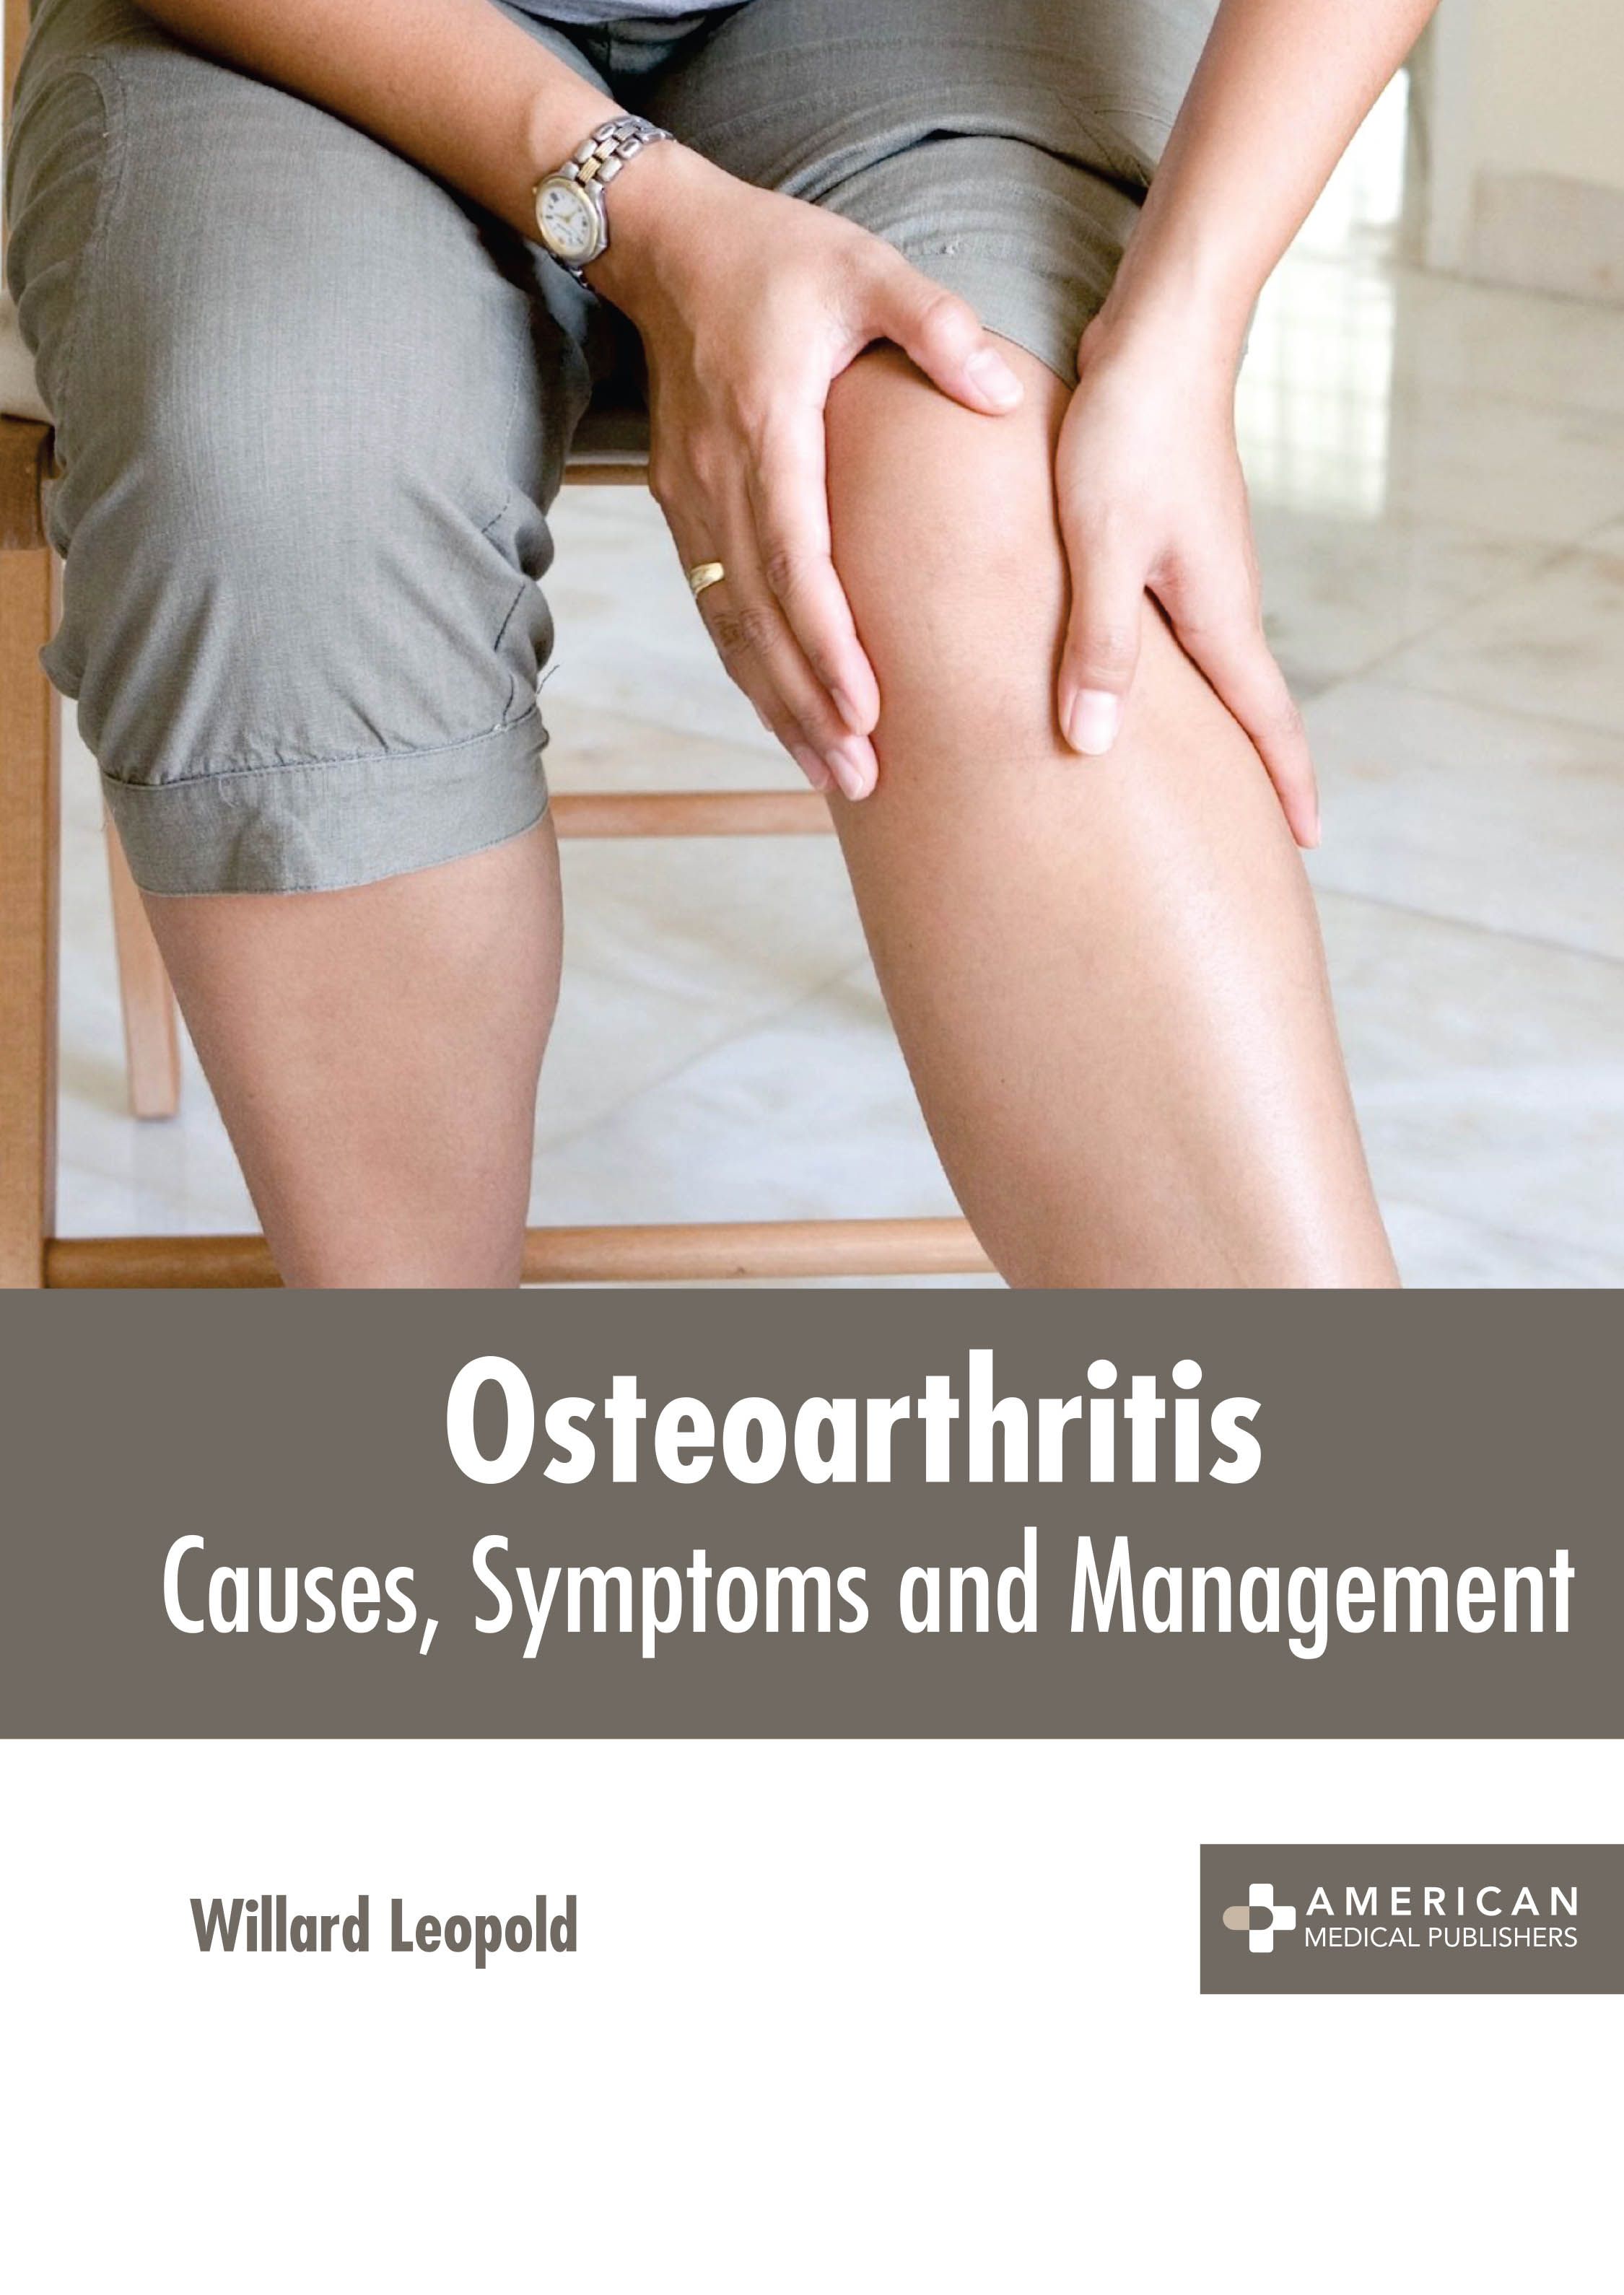 OSTEOARTHRITIS: CAUSES, SYMPTOMS AND MANAGEMENT- ISBN: 9781639274017